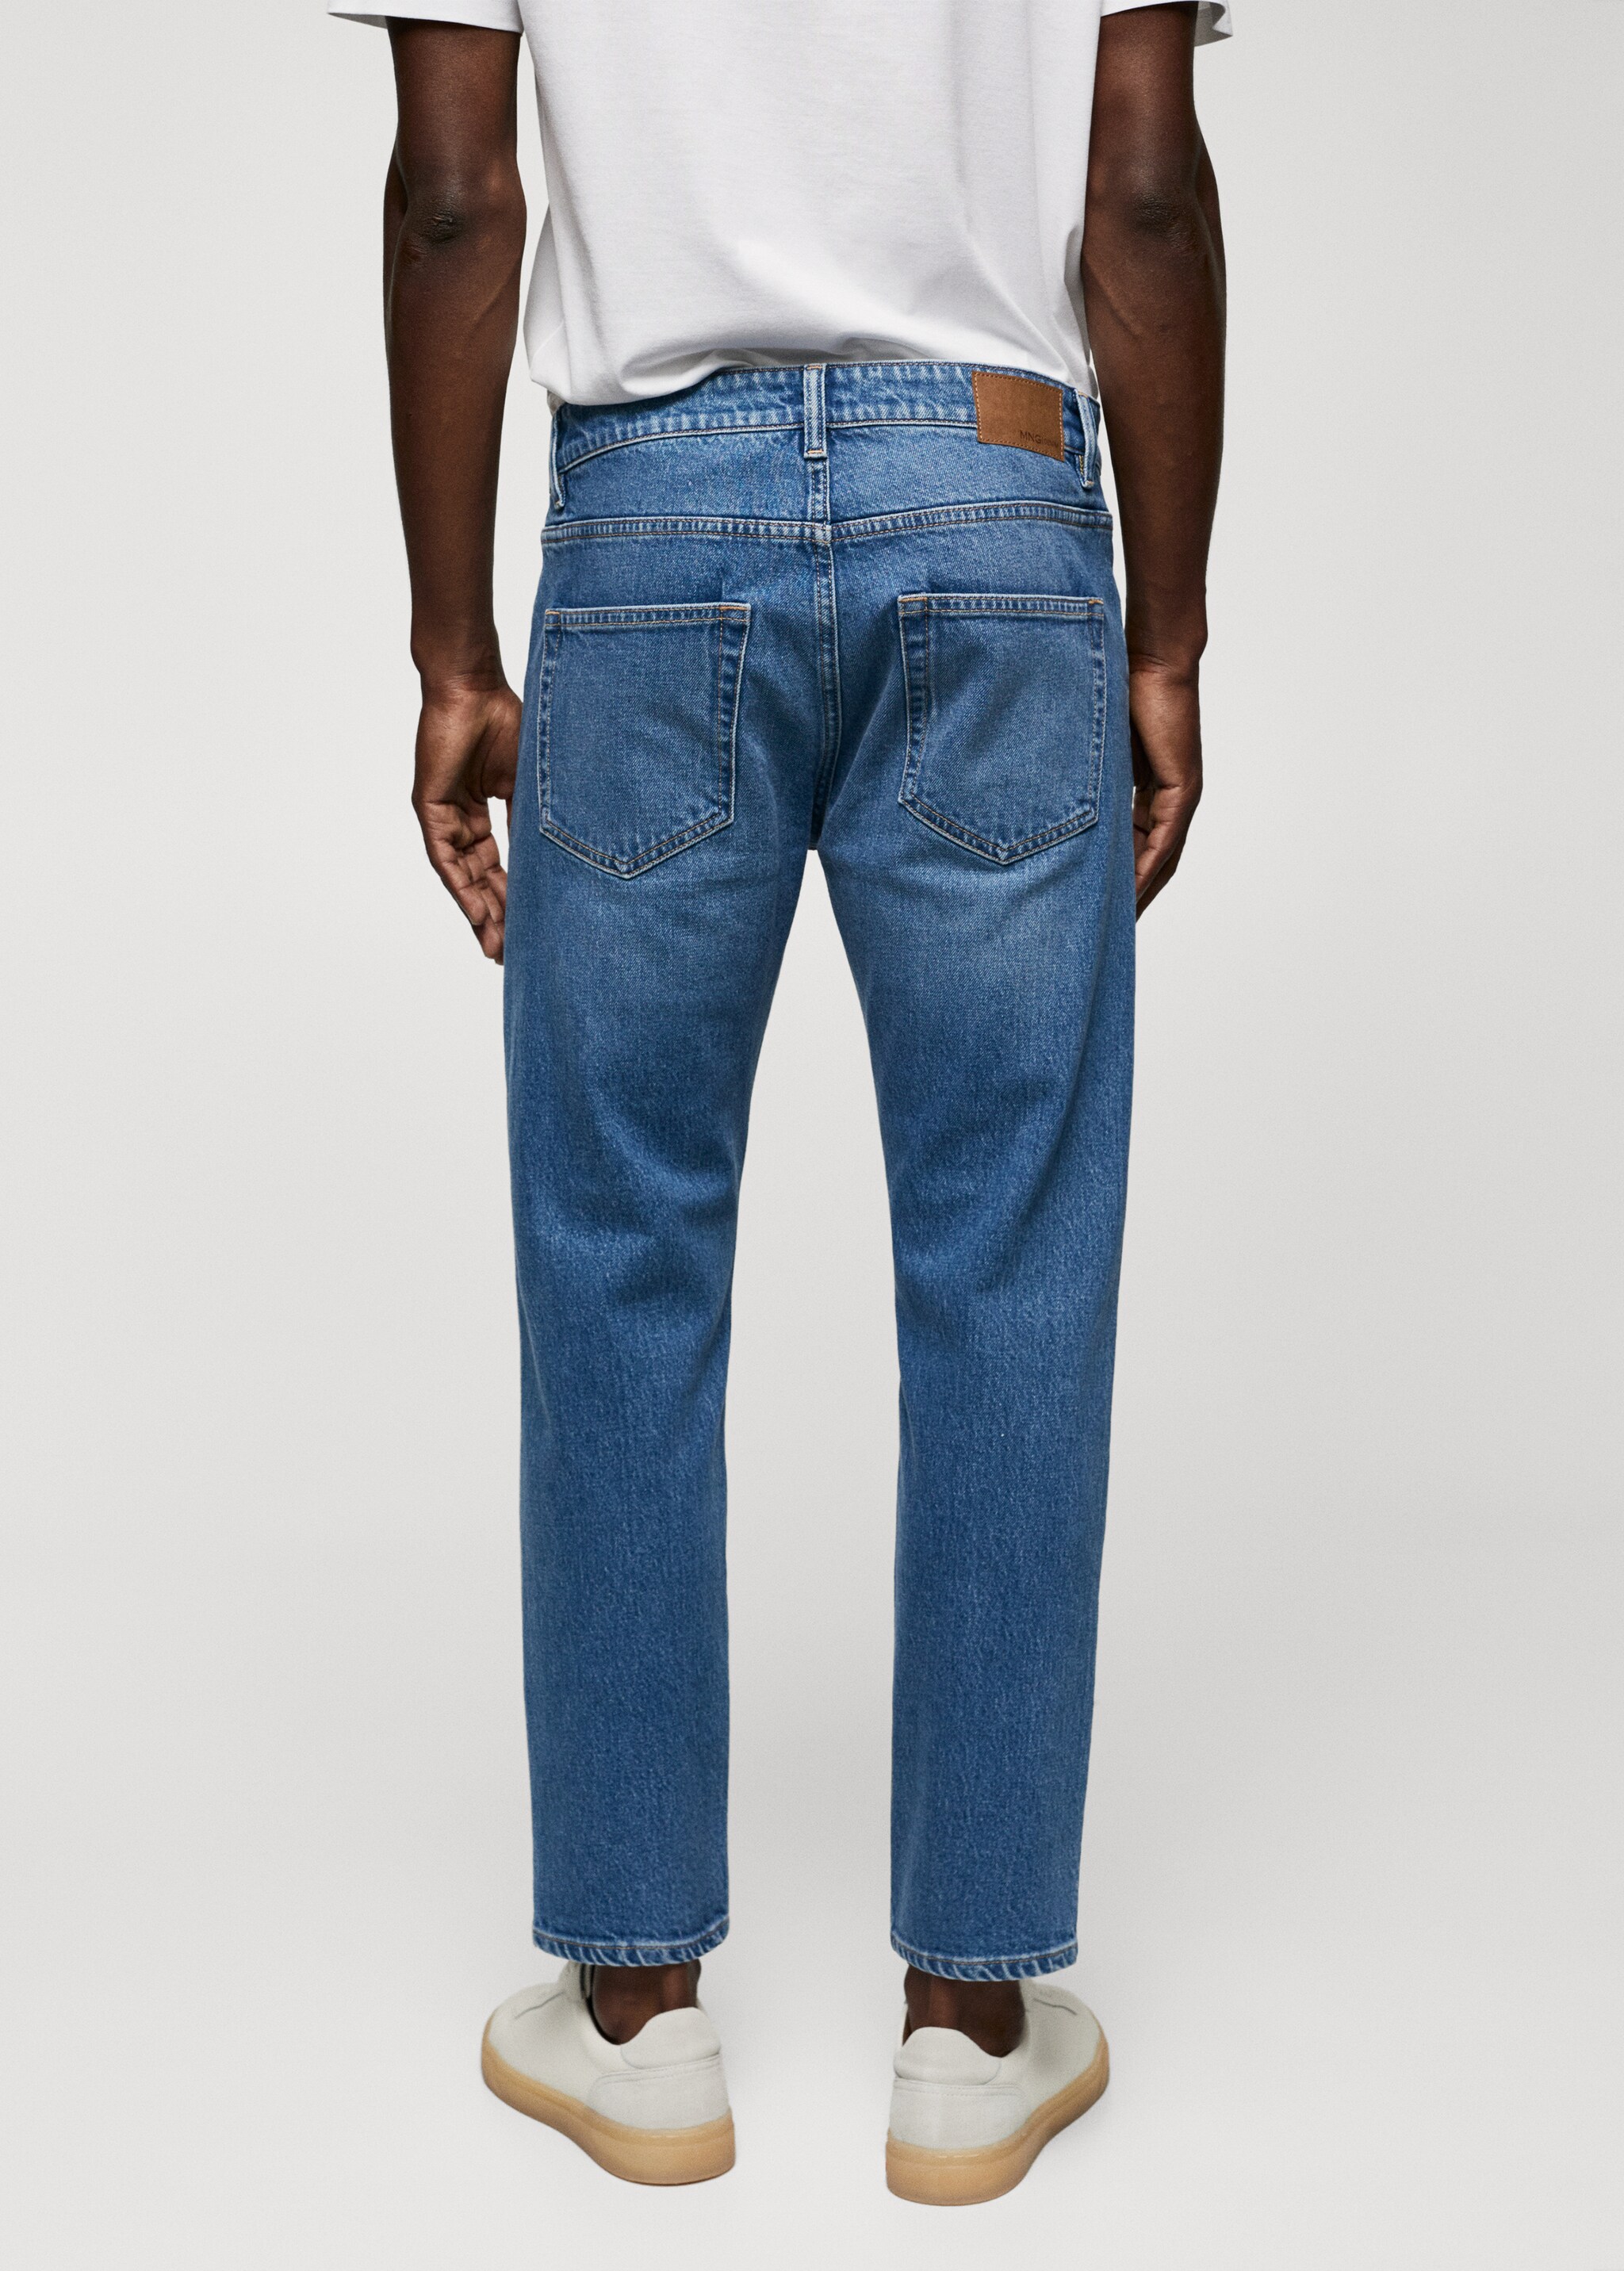 Ben tapered cropped jeans - Reverse of the article